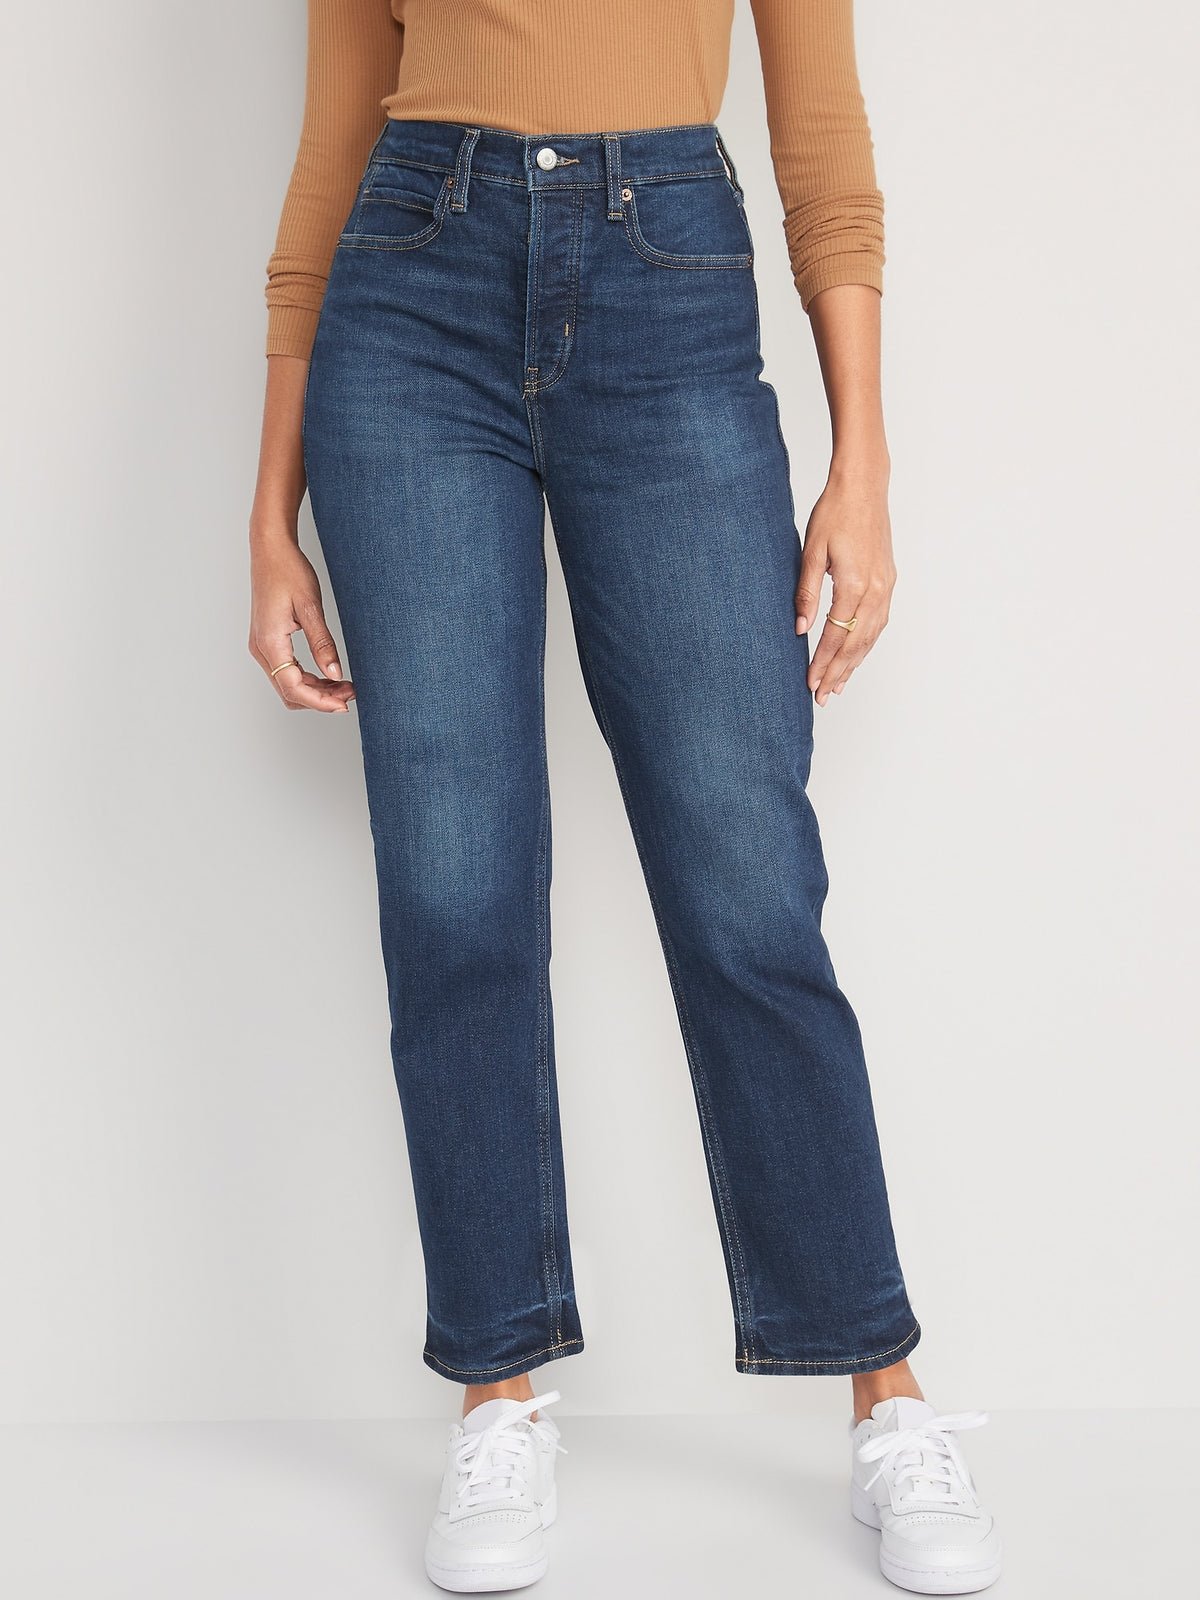 Extra High-Waisted Button-Fly Sky-Hi Straight Jeans for Women_Sheldon_3250.jpeg